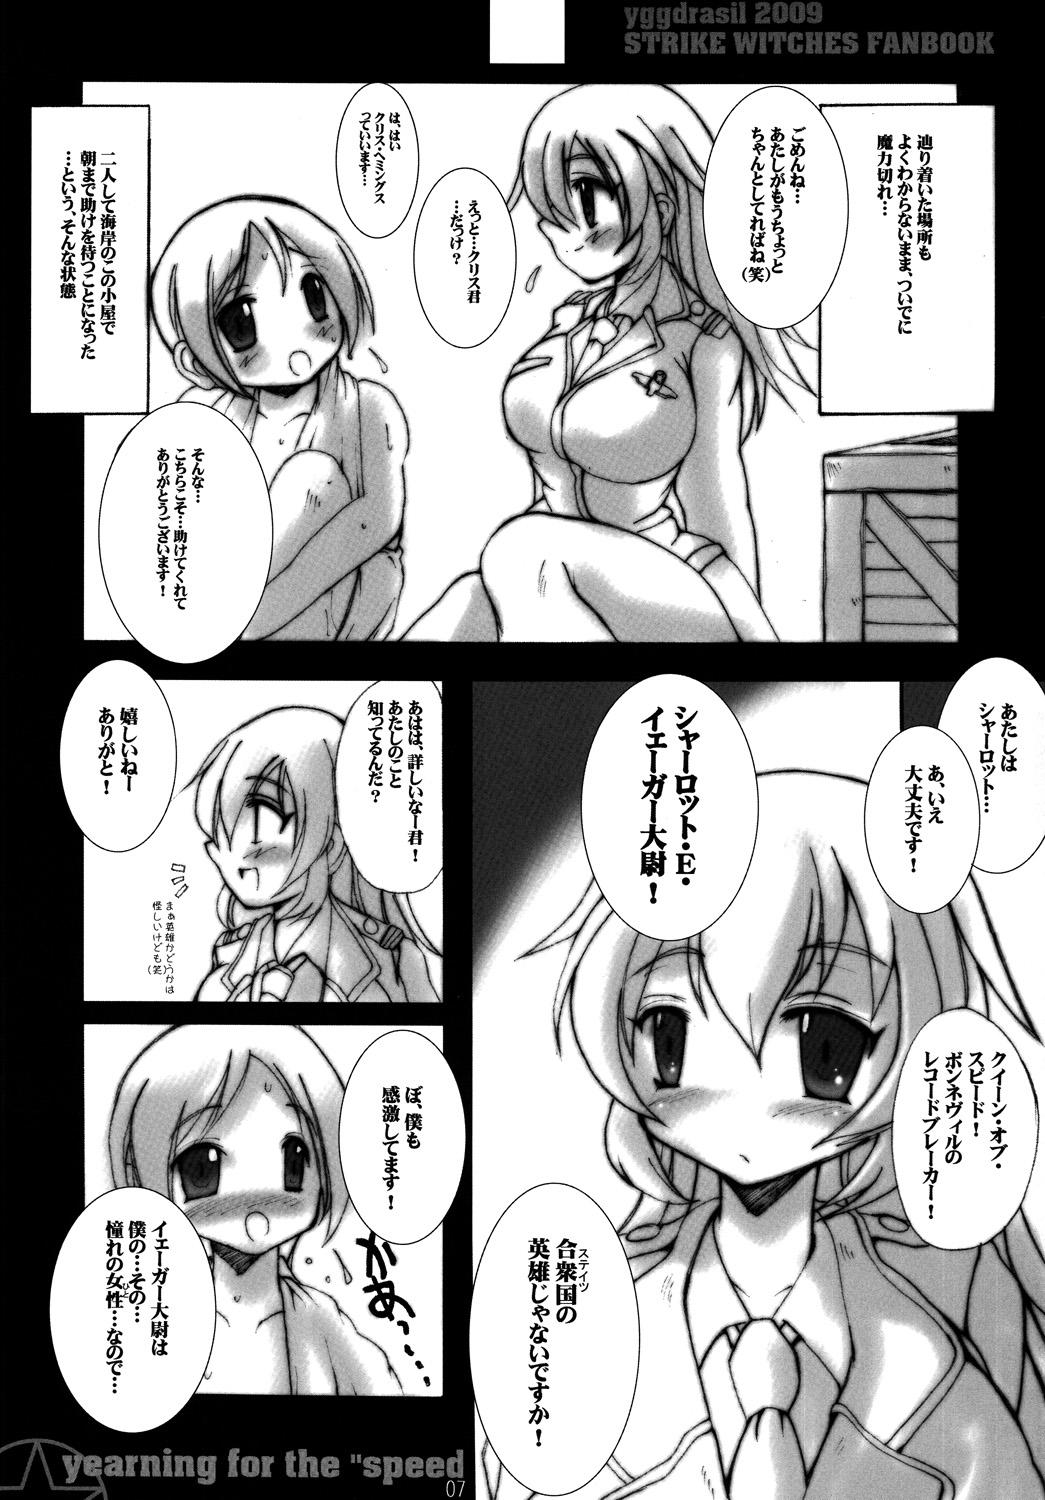 Gostosa yearning for the “speed” - Strike witches Free - Page 6